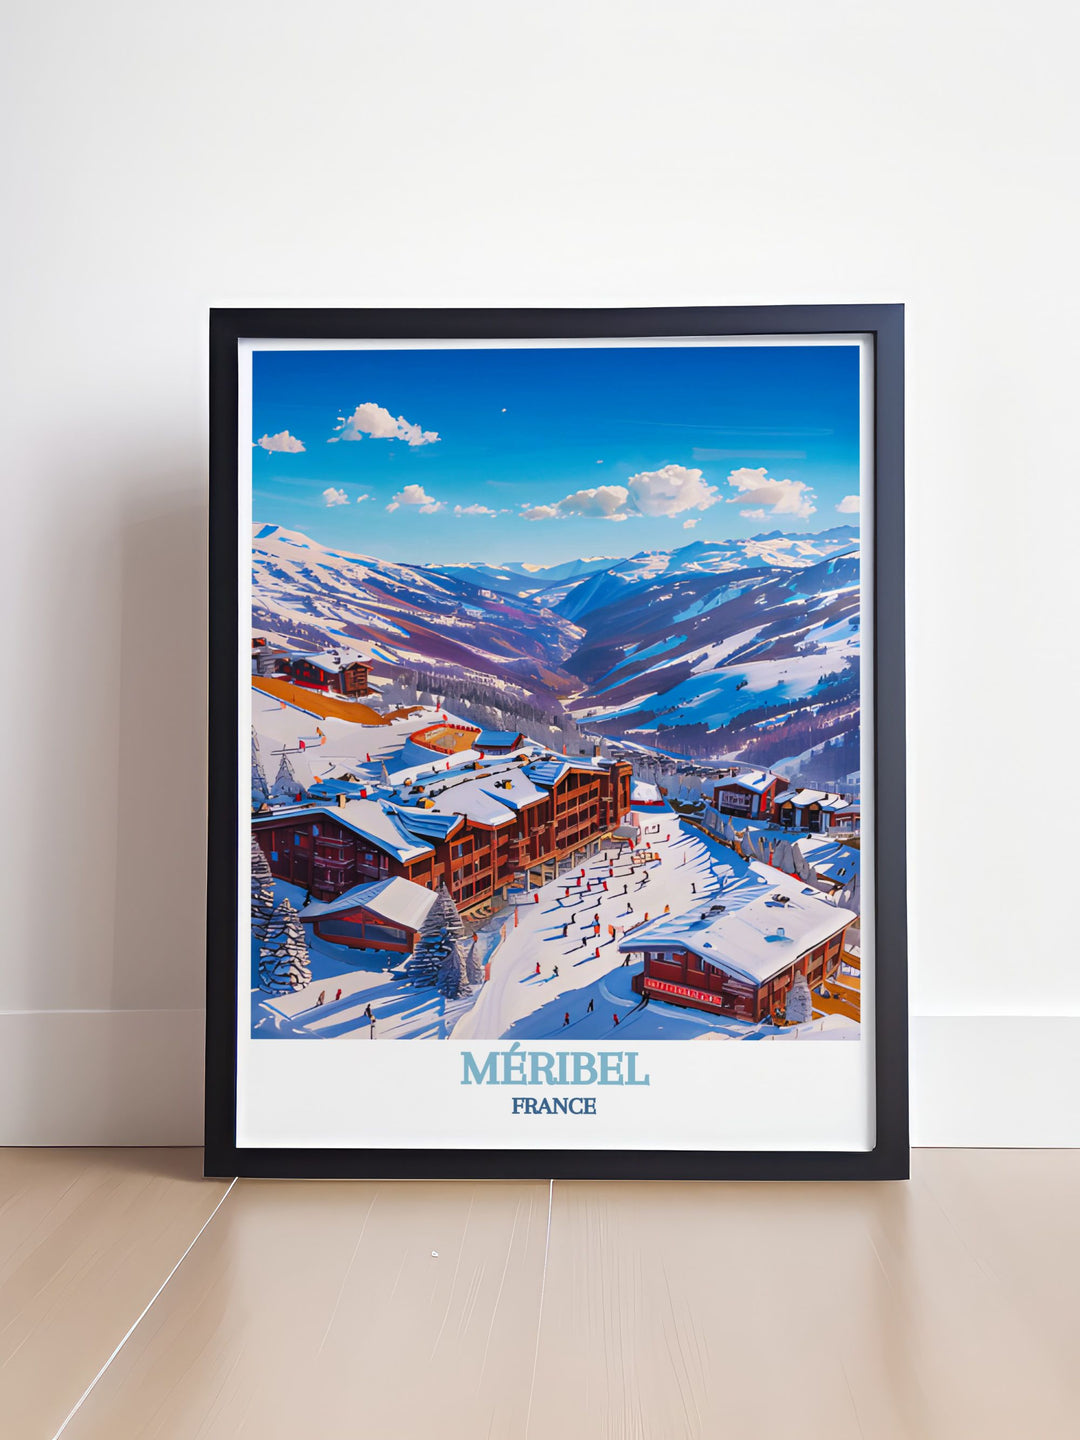 Highlighting the majestic beauty of Mont Vallon, this poster features its dramatic peaks and expansive snowfields, ideal for those who love high altitude adventures.